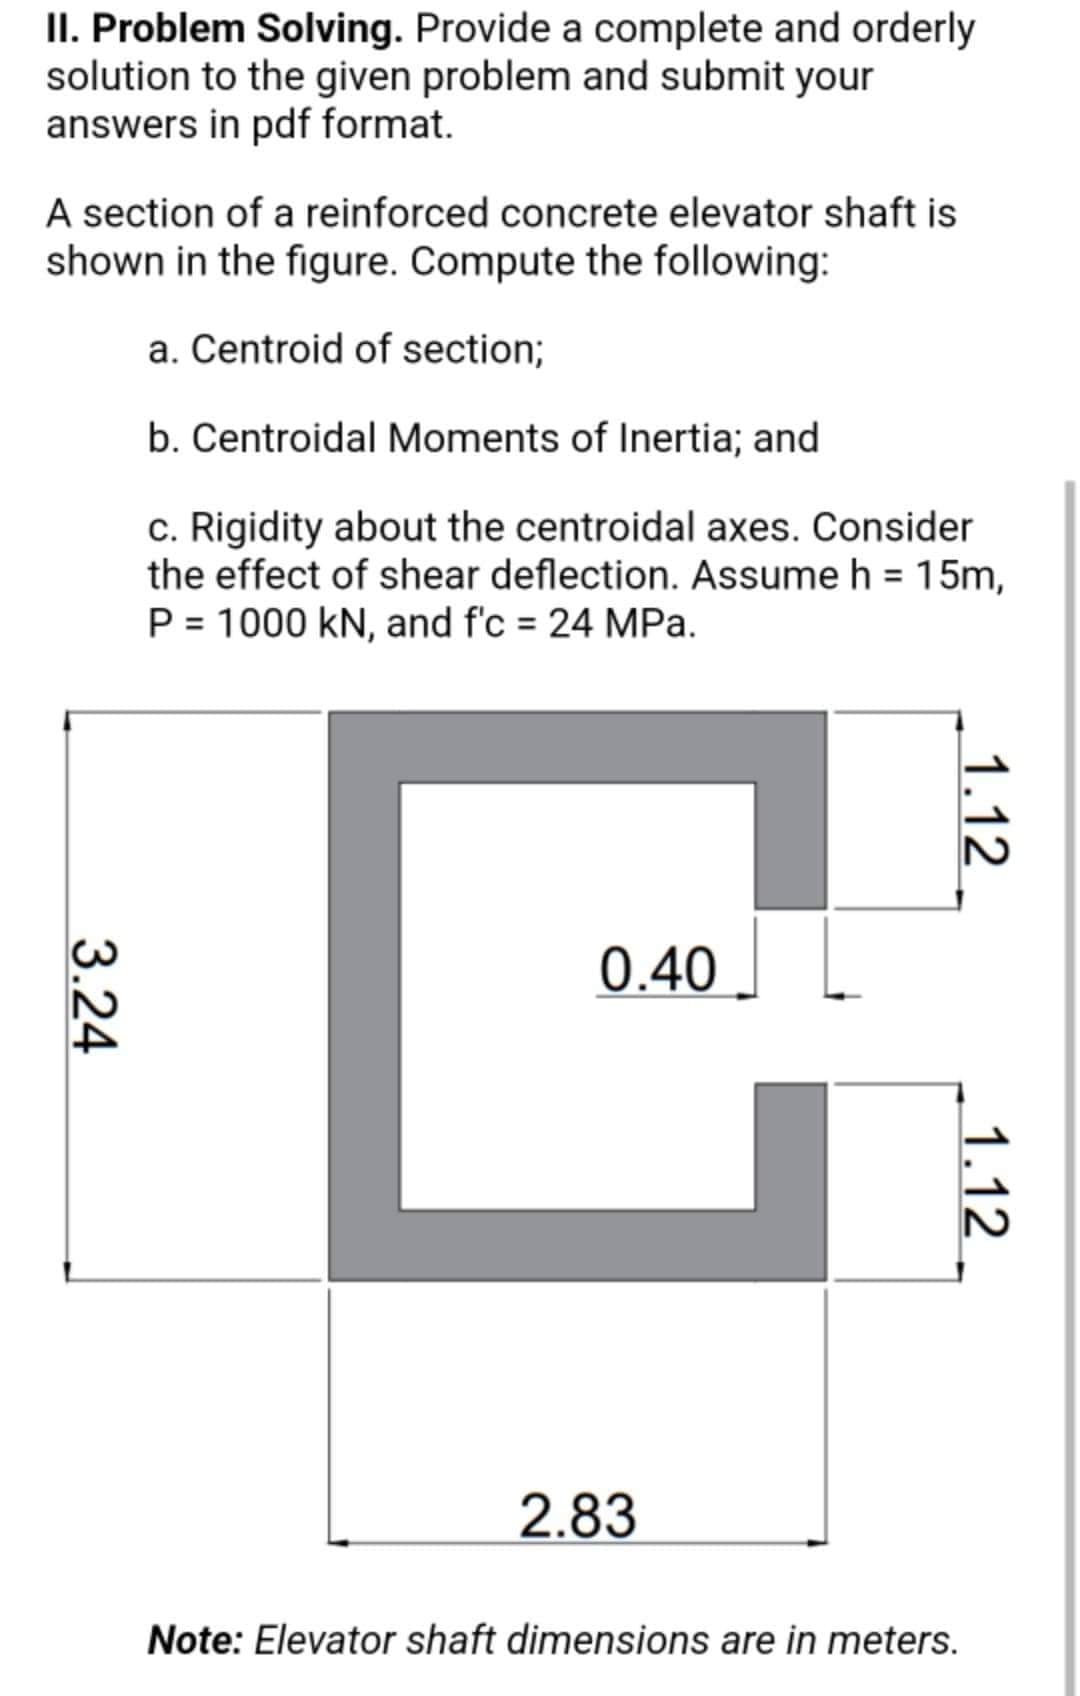 II. Problem Solving. Provide a complete and orderly
solution to the given problem and submit your
answers in pdf format.
A section of a reinforced concrete elevator shaft is
shown in the figure. Compute the following:
a. Centroid of section;
b. Centroidal Moments of Inertia; and
c. Rigidity about the centroidal axes. Consider
the effect of shear deflection. Assume h = 15m,
P = 1000 kN, and f'c = 24 MPa.
C
0.40
2.83
Note: Elevator shaft dimensions are in meters.
3.24
1.12
1.12